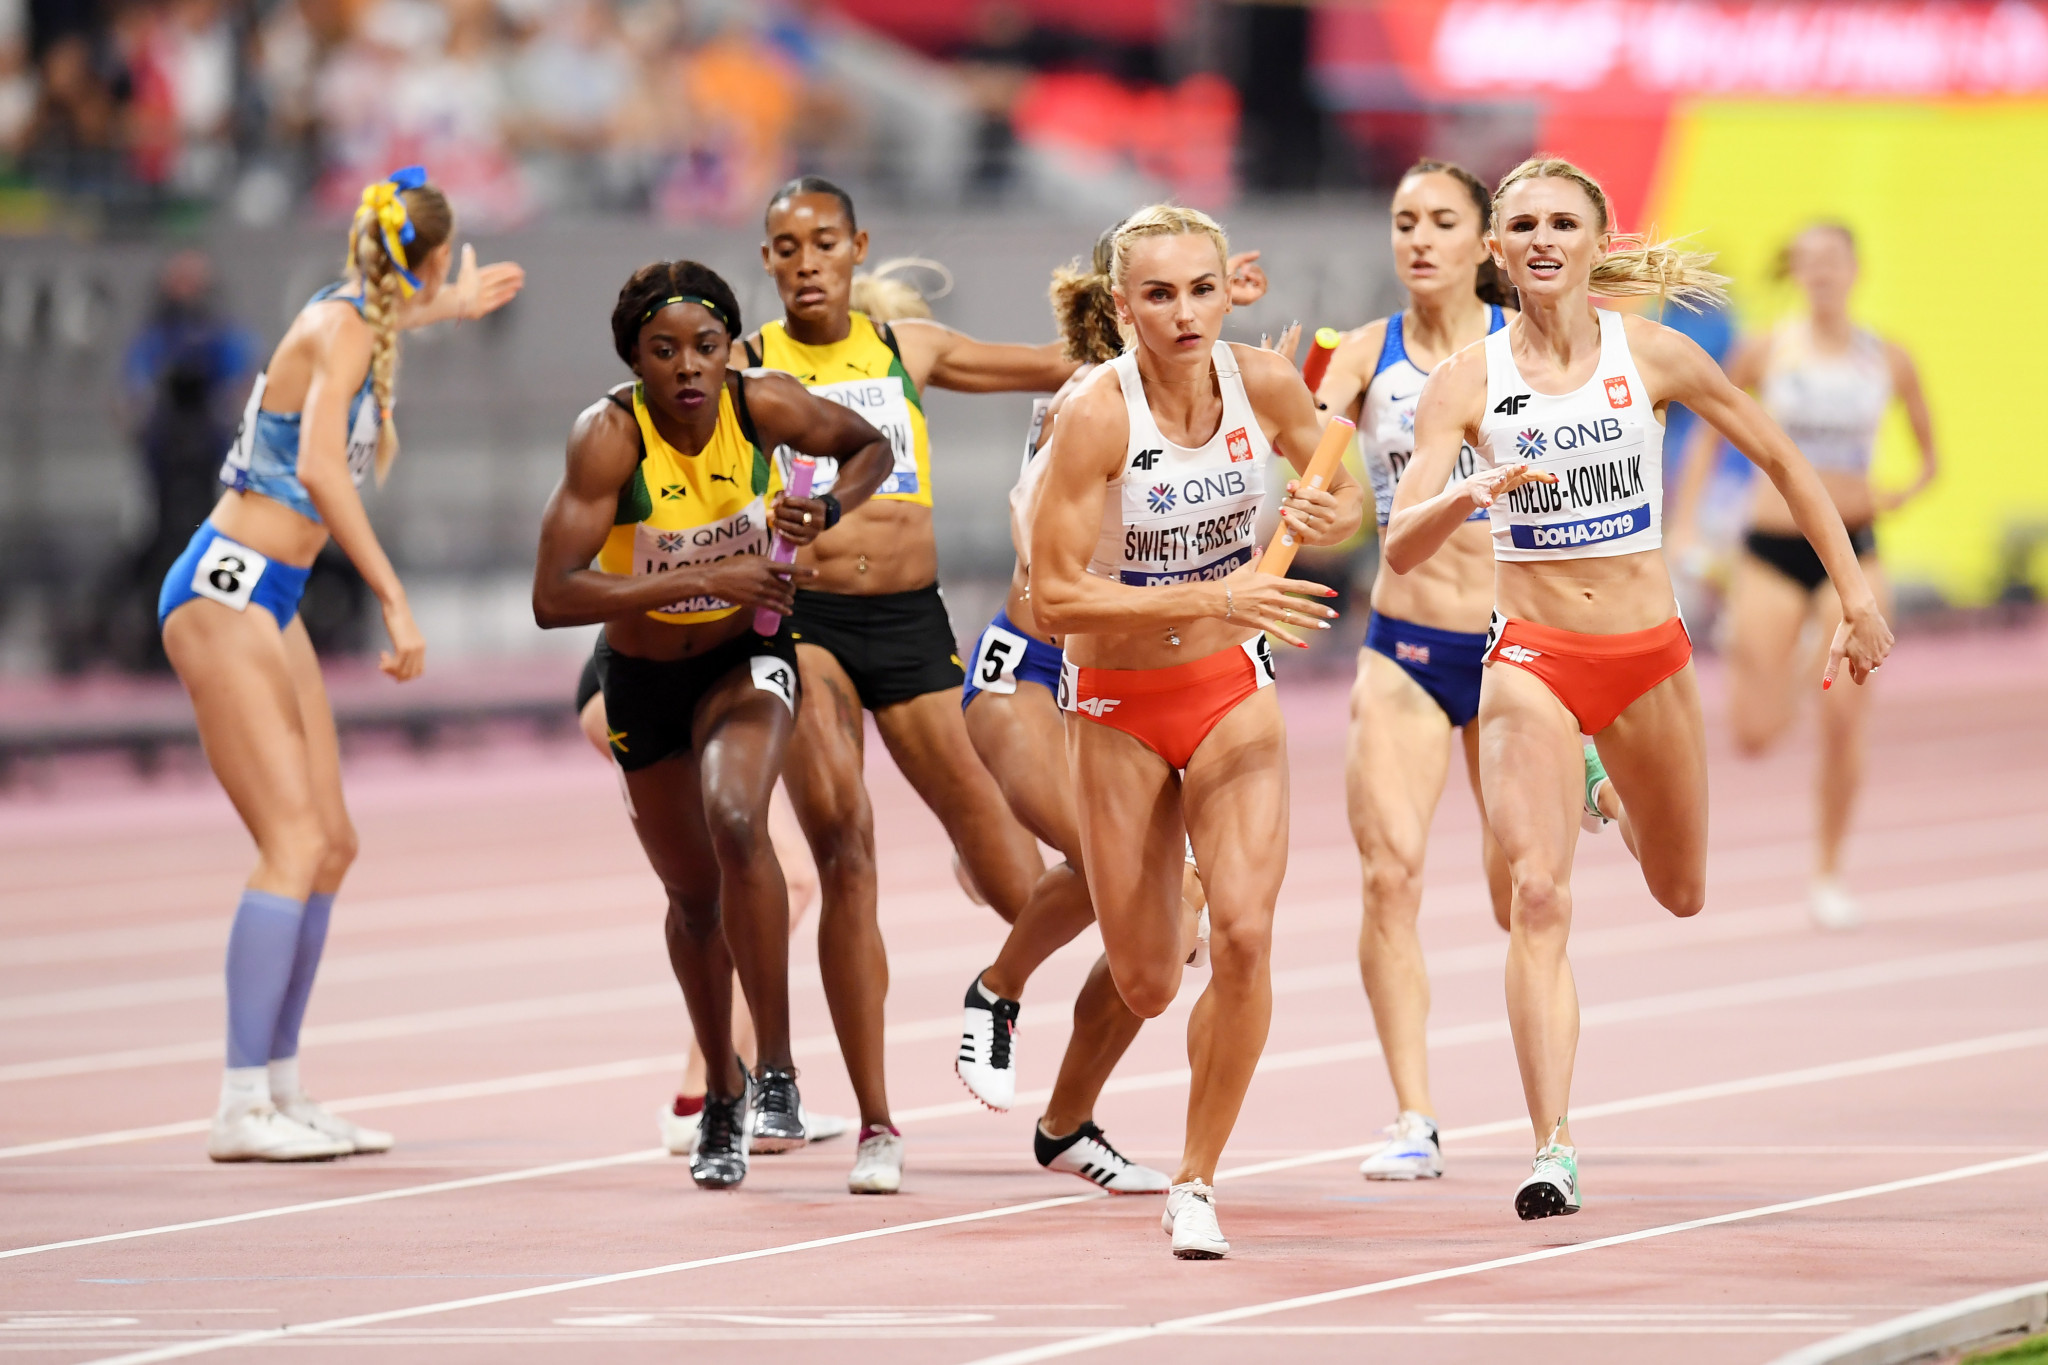 World Athletics Championships Daily Schedule, Times, How to Watch